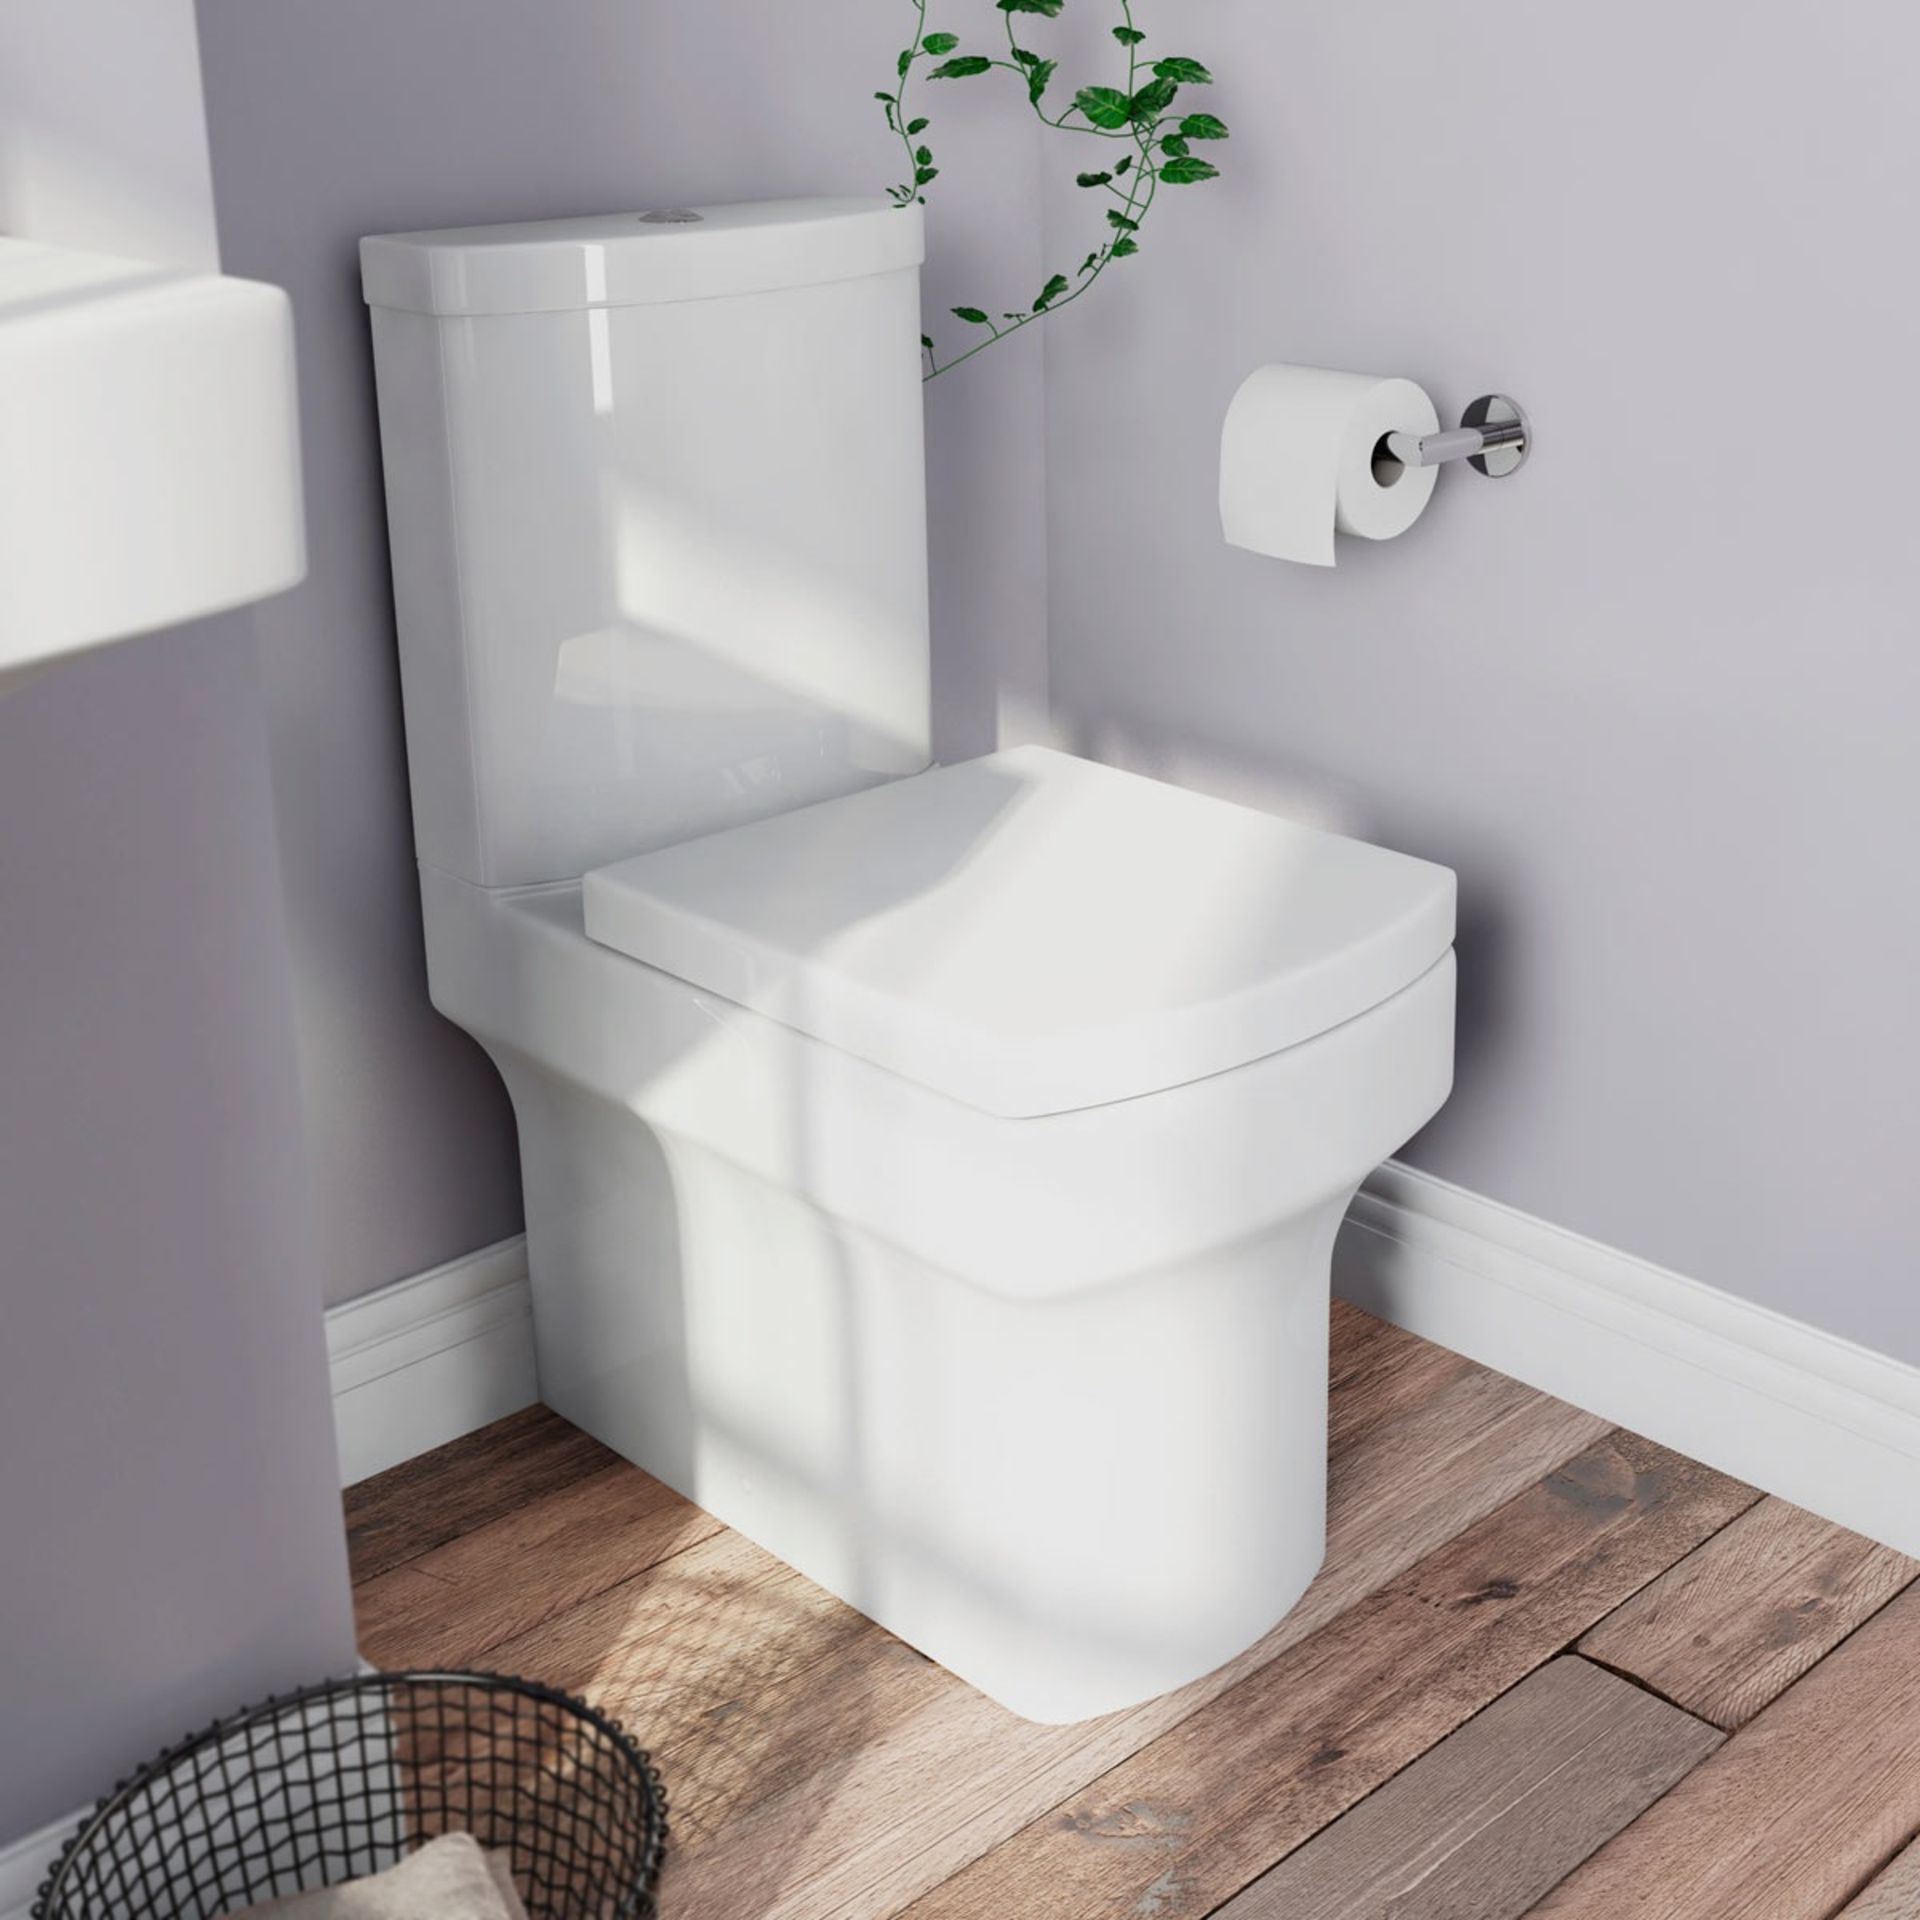 1 x Vermont Close Coupled WC Toilet Pan With Cistern, Cistern Fittings and Soft Close Toilet